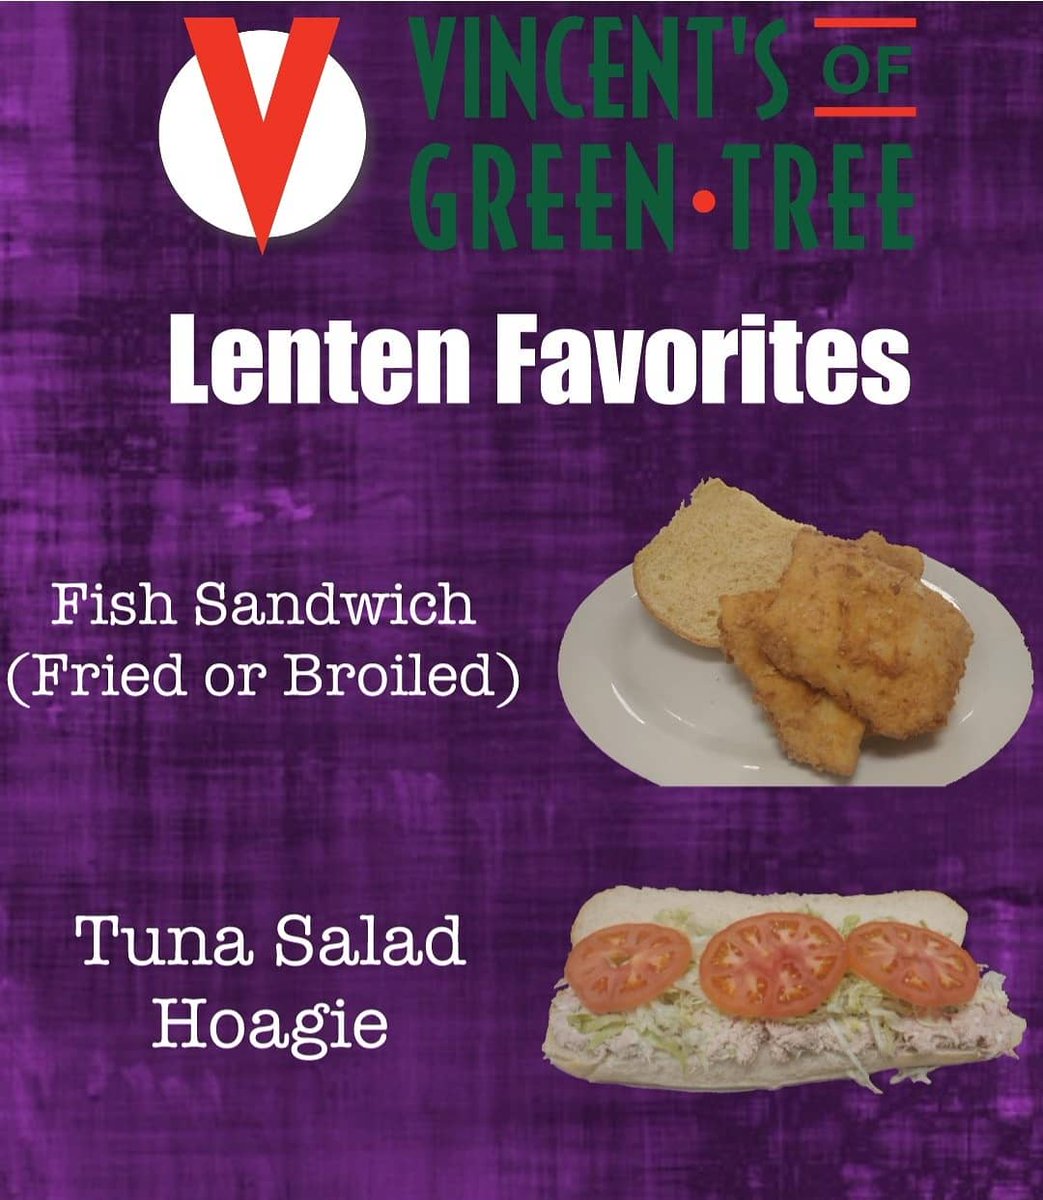 Lent has arrived! Stop in for our delicious Ash Wednesday specials, available for dine-in, takeout, or delivery! #ashwednesday #fishfry #pittsburgh #localeats #dinein #takeout #delivery #specials #pittsburghfishfrys #lent #shrimpsalad #fishsandwich #tunasalad #haluski